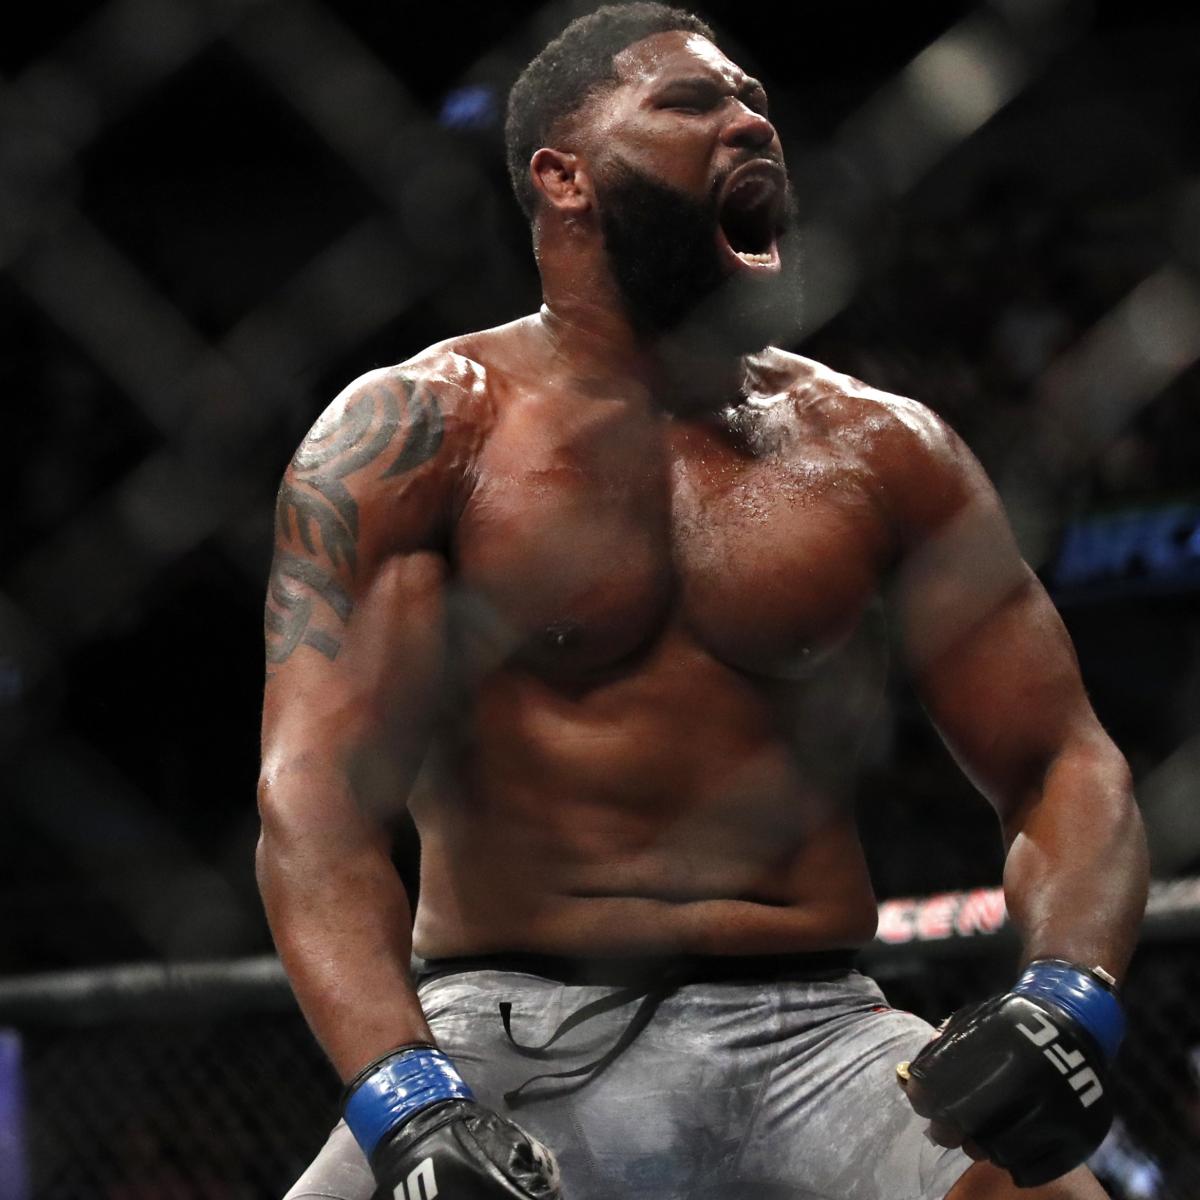 Curtis Blaydes and the Best UFC Heavyweights Not Named Francis Ngannou